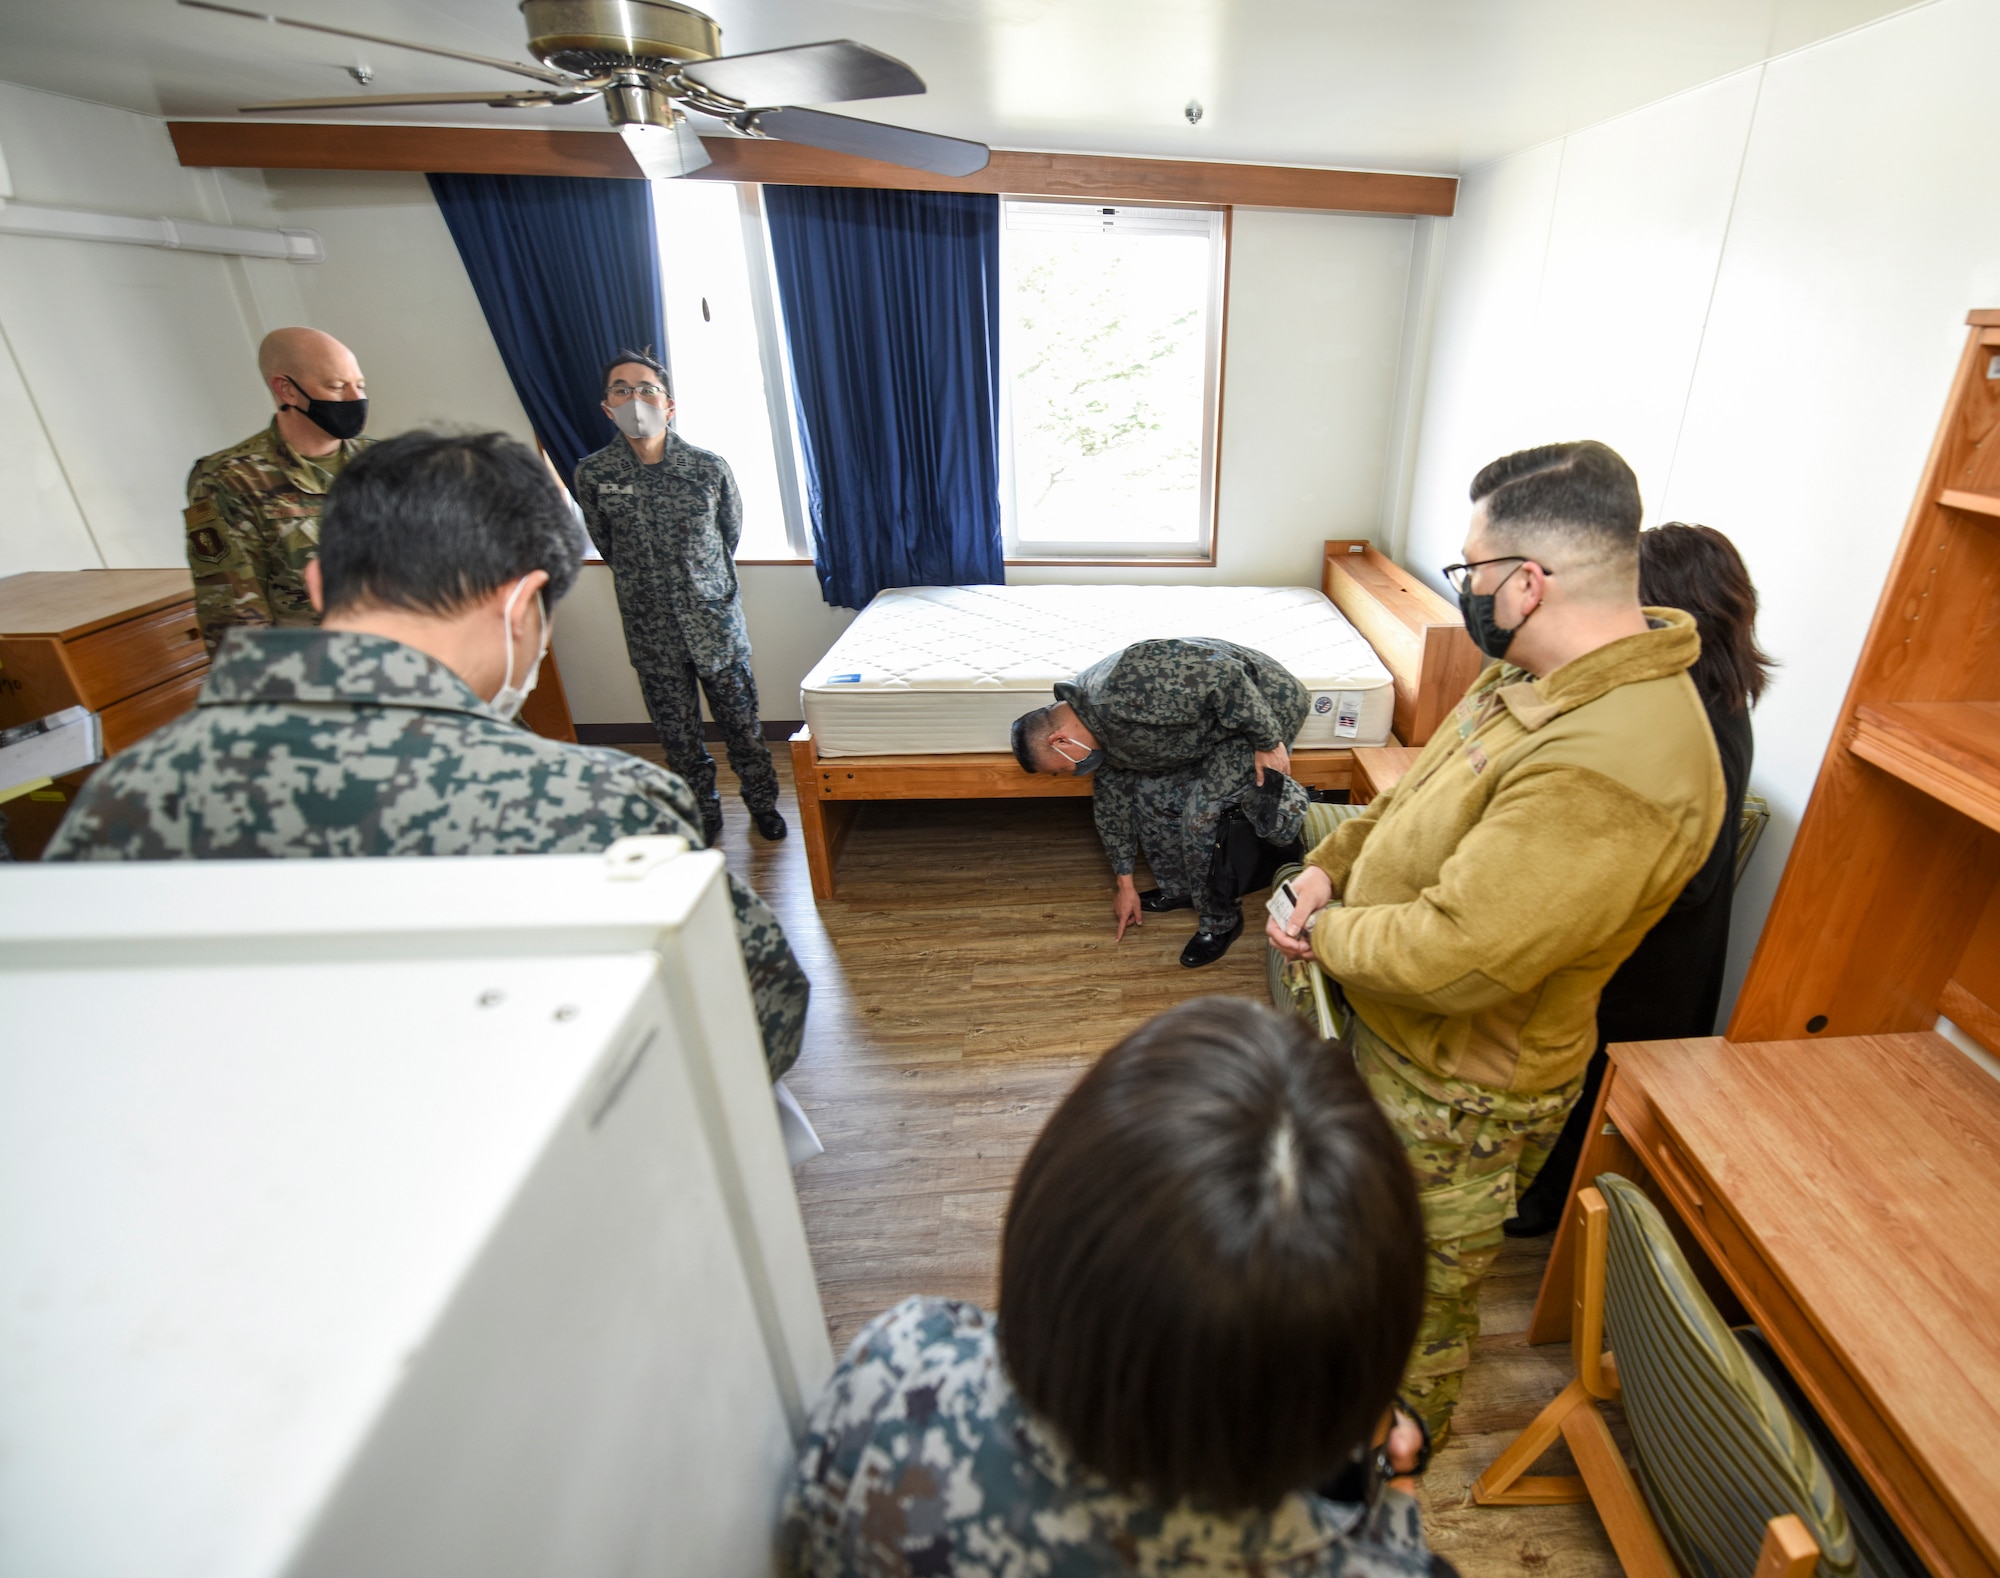 U.S. and Japanese Airmen stand in a dormitory room on the 35th Fighter Wing's Unaccompanied Housing campus at Misawa Air Base, Japan, Feb. 26, 2021. As they are in the process of improving their own campus, Japan Air Self-Defense Force leaders from the 3rd Air Wing took the tour to gain some perspective on how the 35th FW manages and operates its campus. During the tour, they got to ask questions about the furniture and appliance costs, determining the occupants of rooms, shared living spaces and even mold prevention. (U.S. Air Force photo by Tech. Sgt. Timothy Moore)